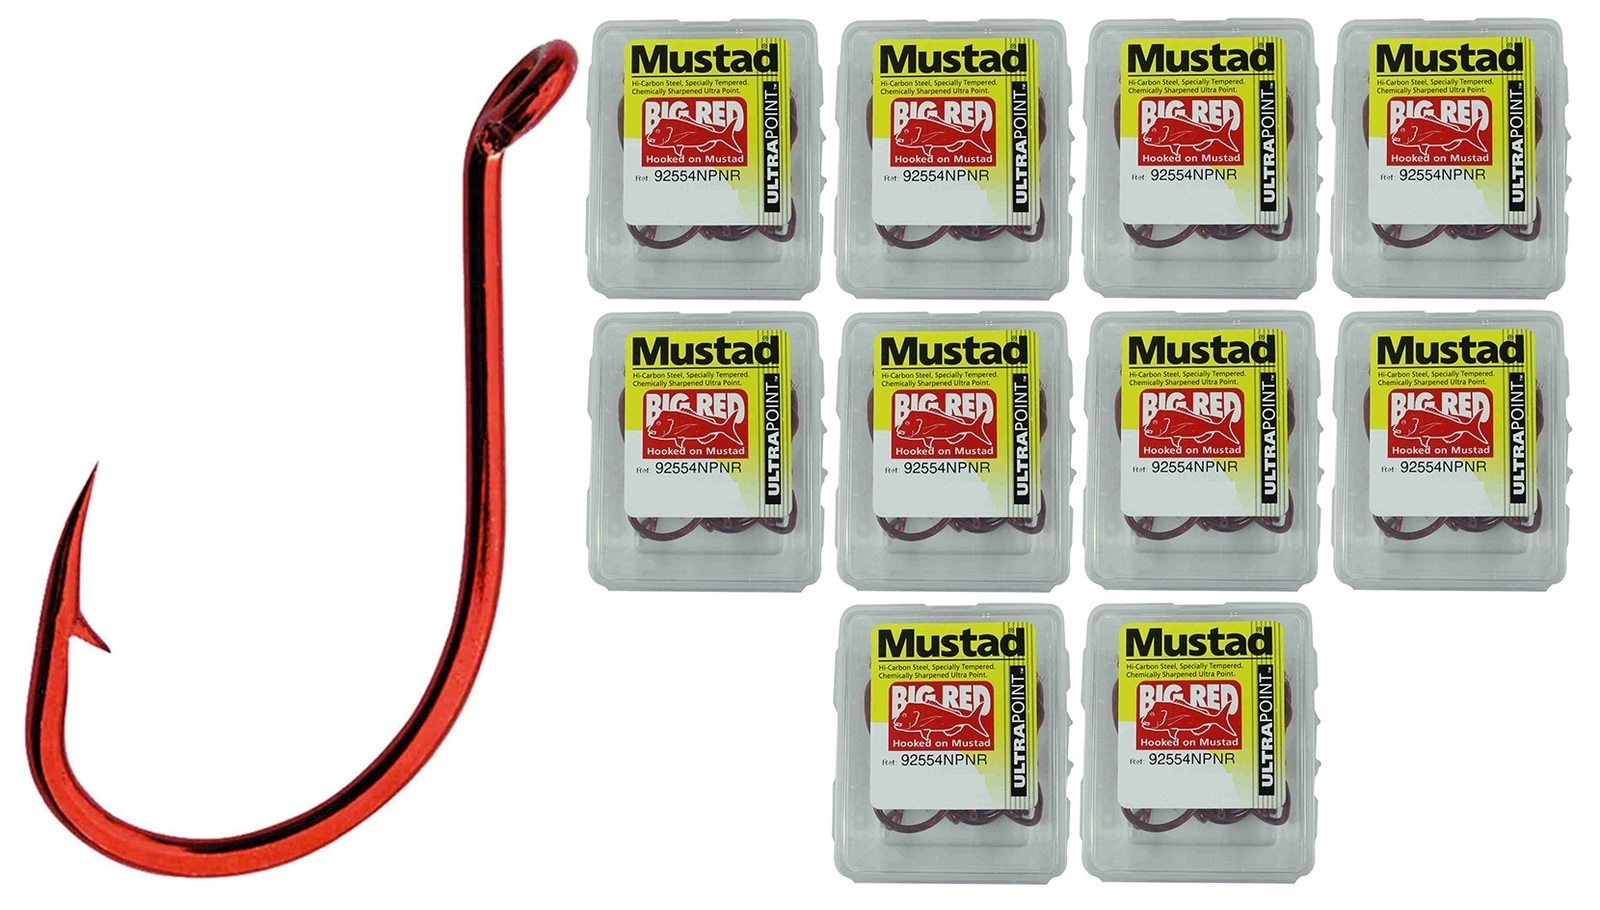 10 Boxes of Mustad 92554NPNR Big Red Chemically Sharpened Fishing